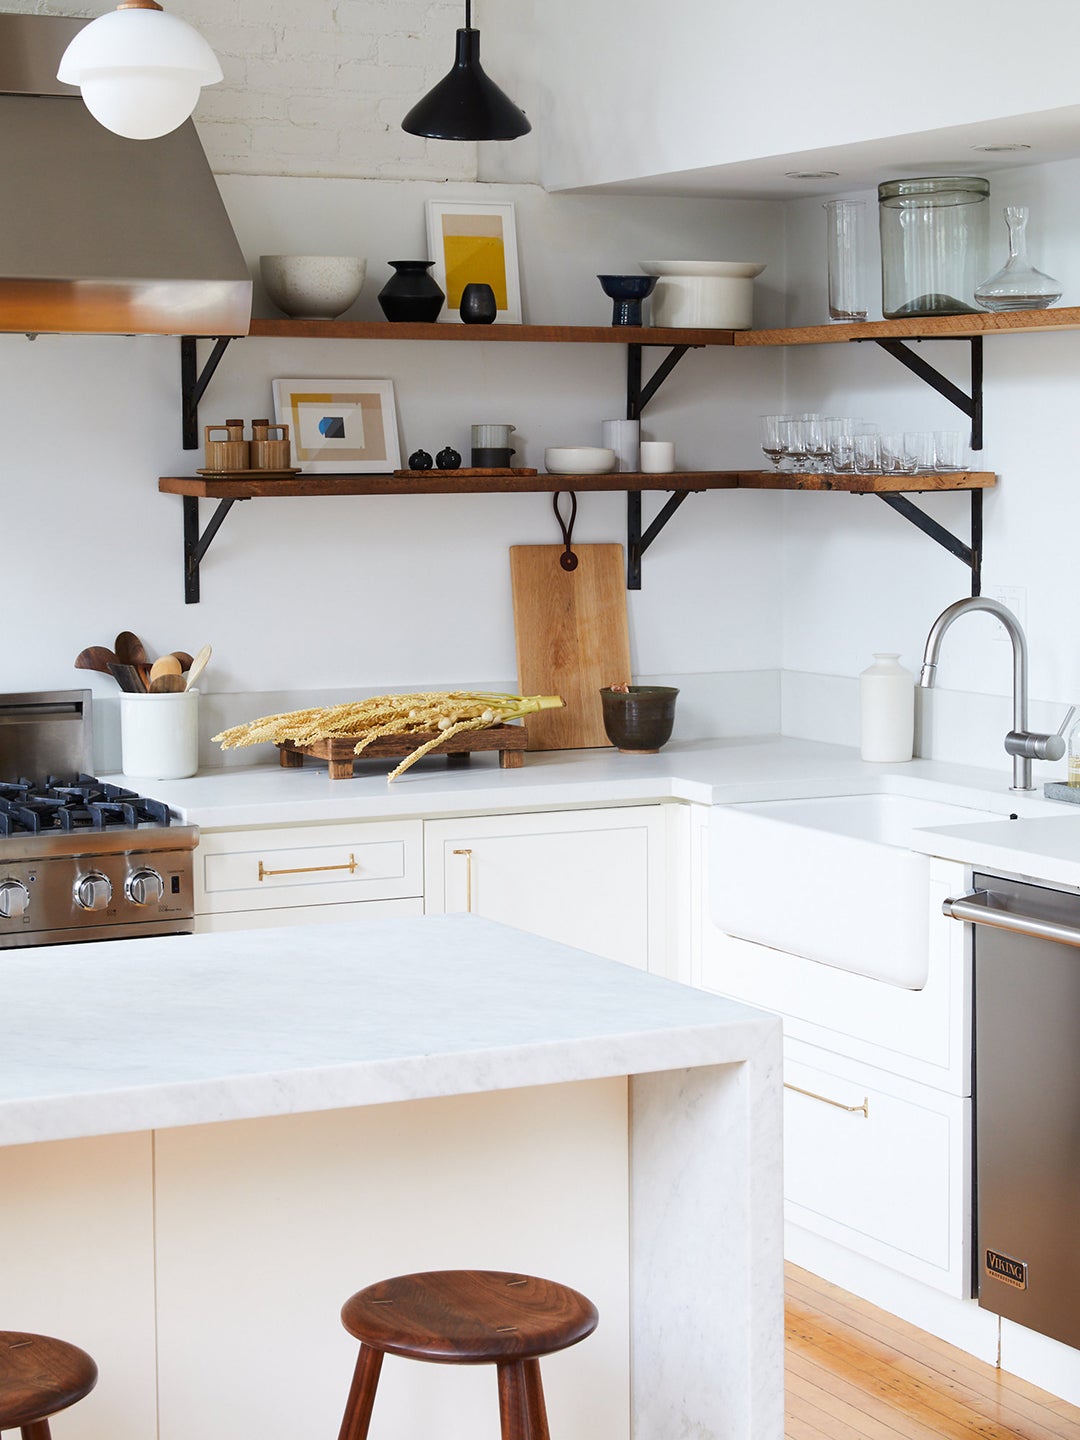 Open kitchen shelving with black brackets